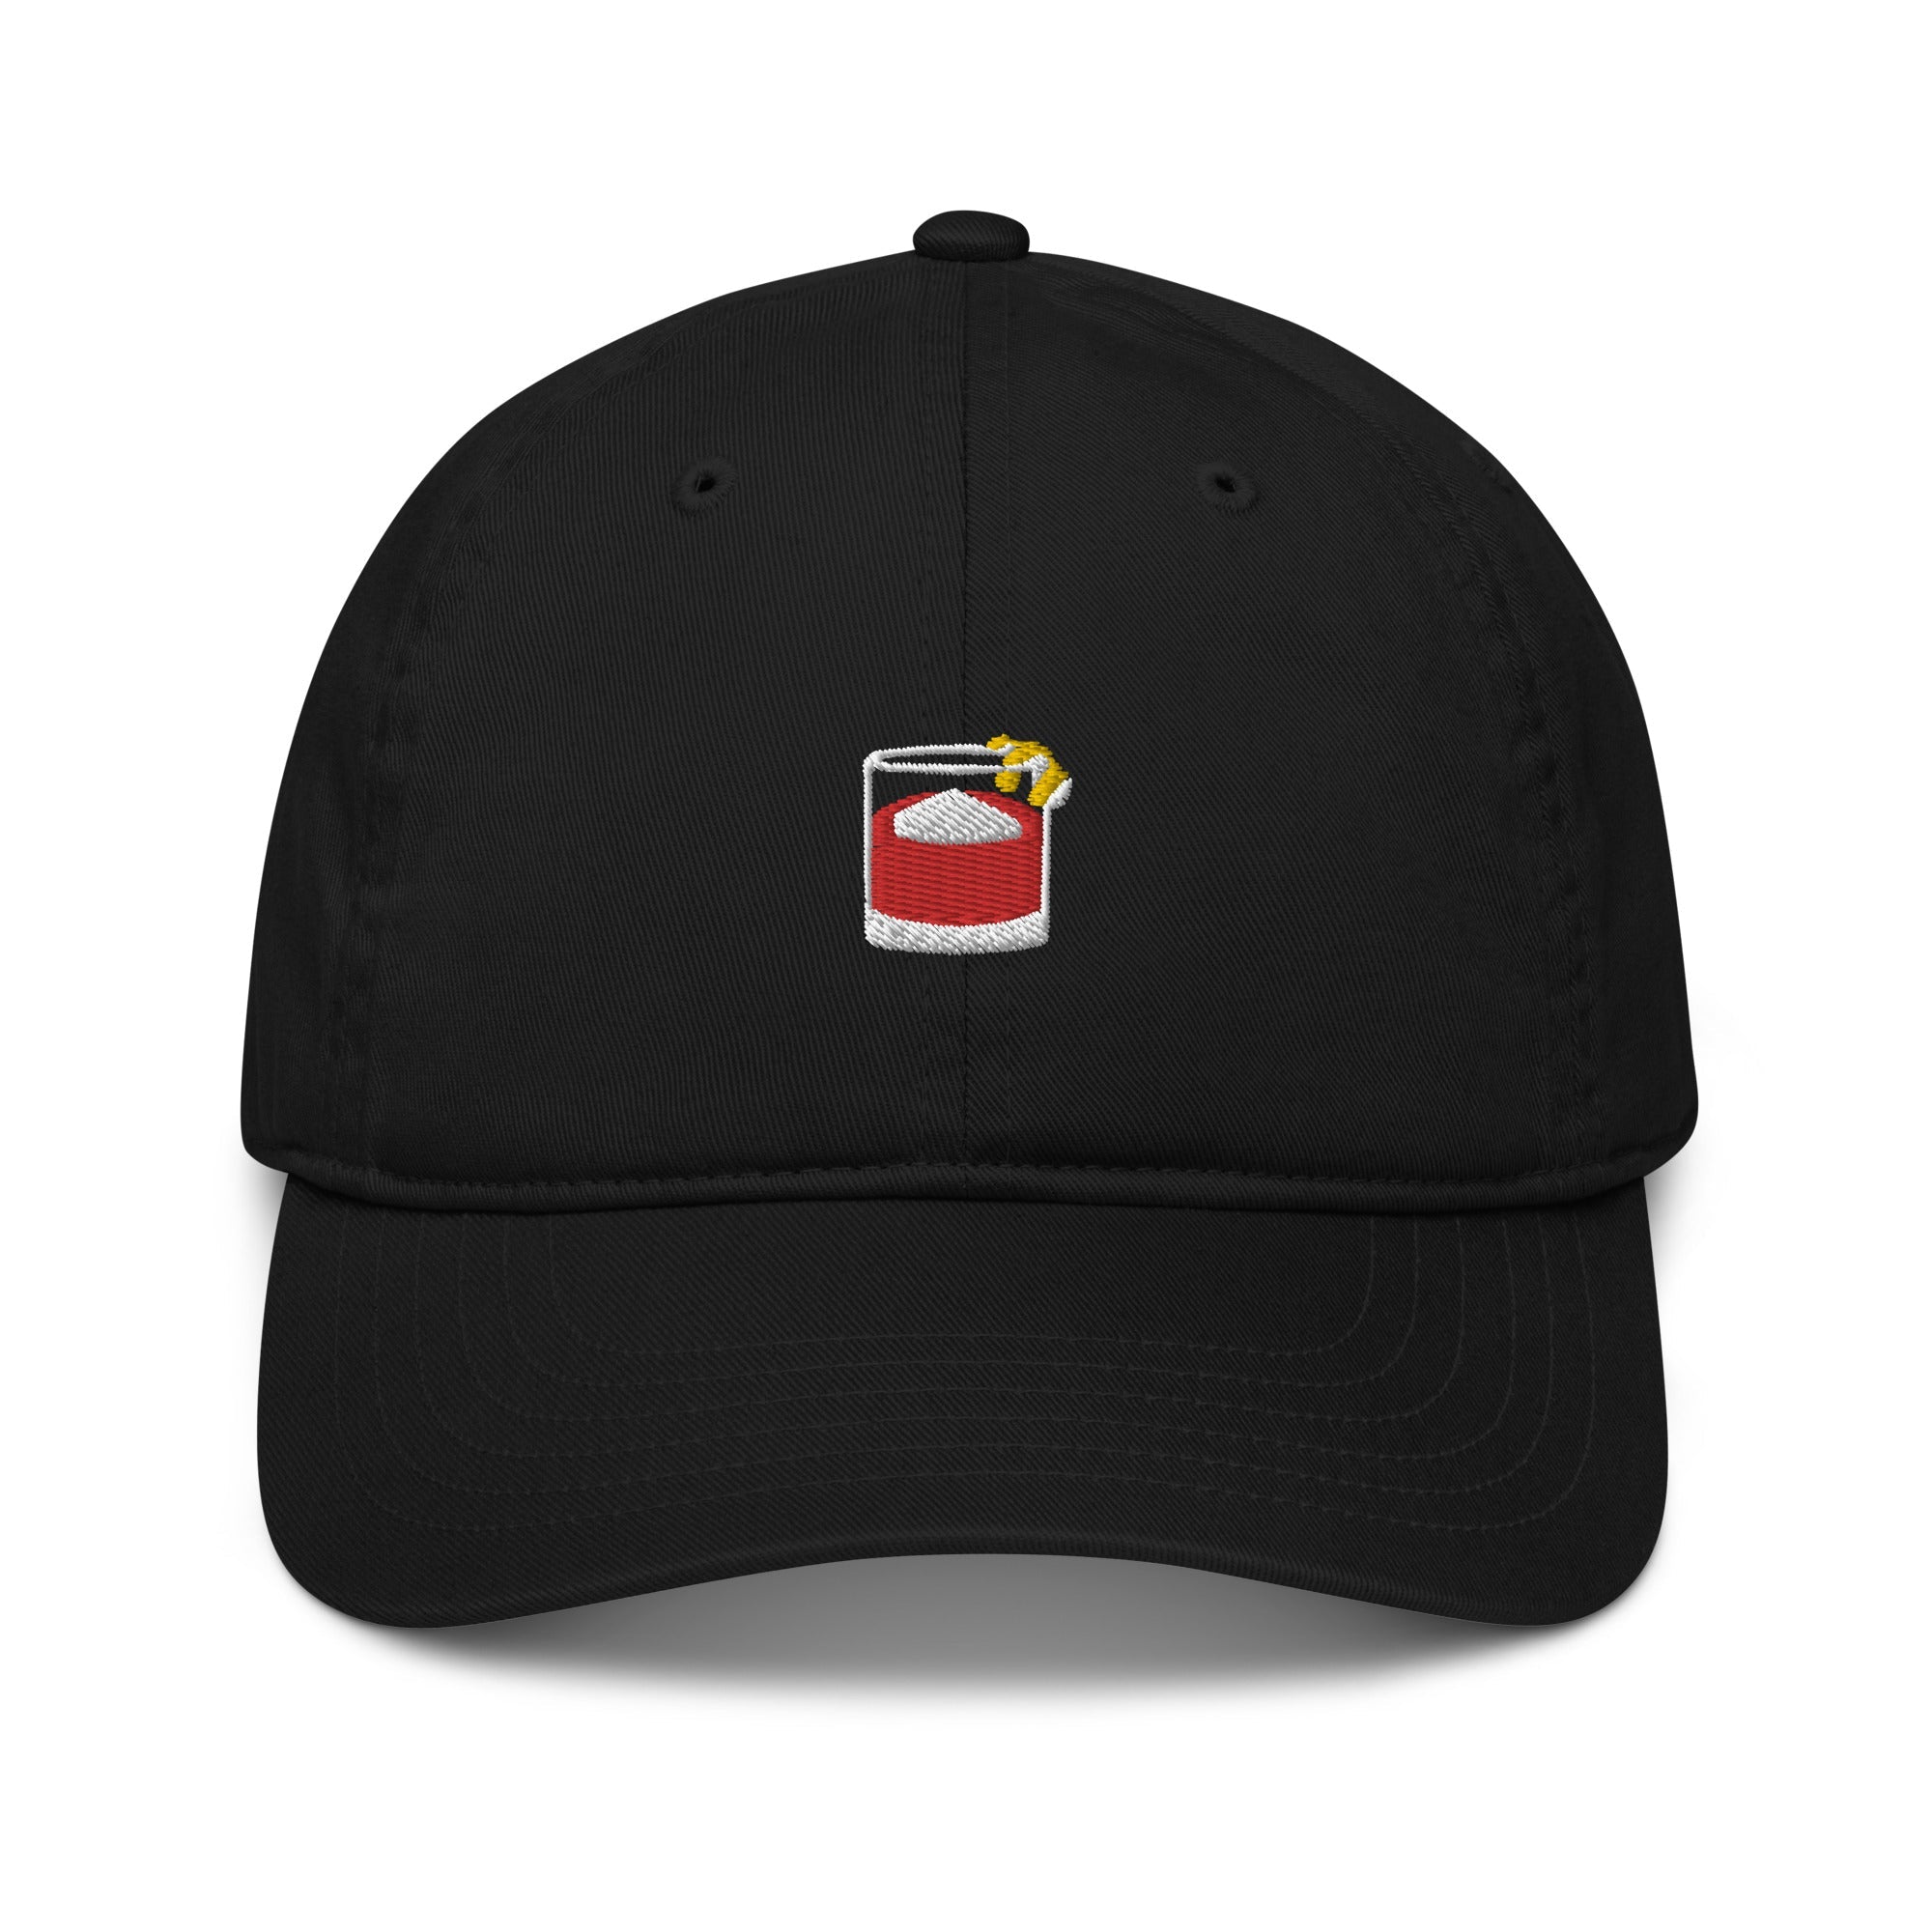 Negroni Glass - Organic Embroidered Cap - The Refined Spirit